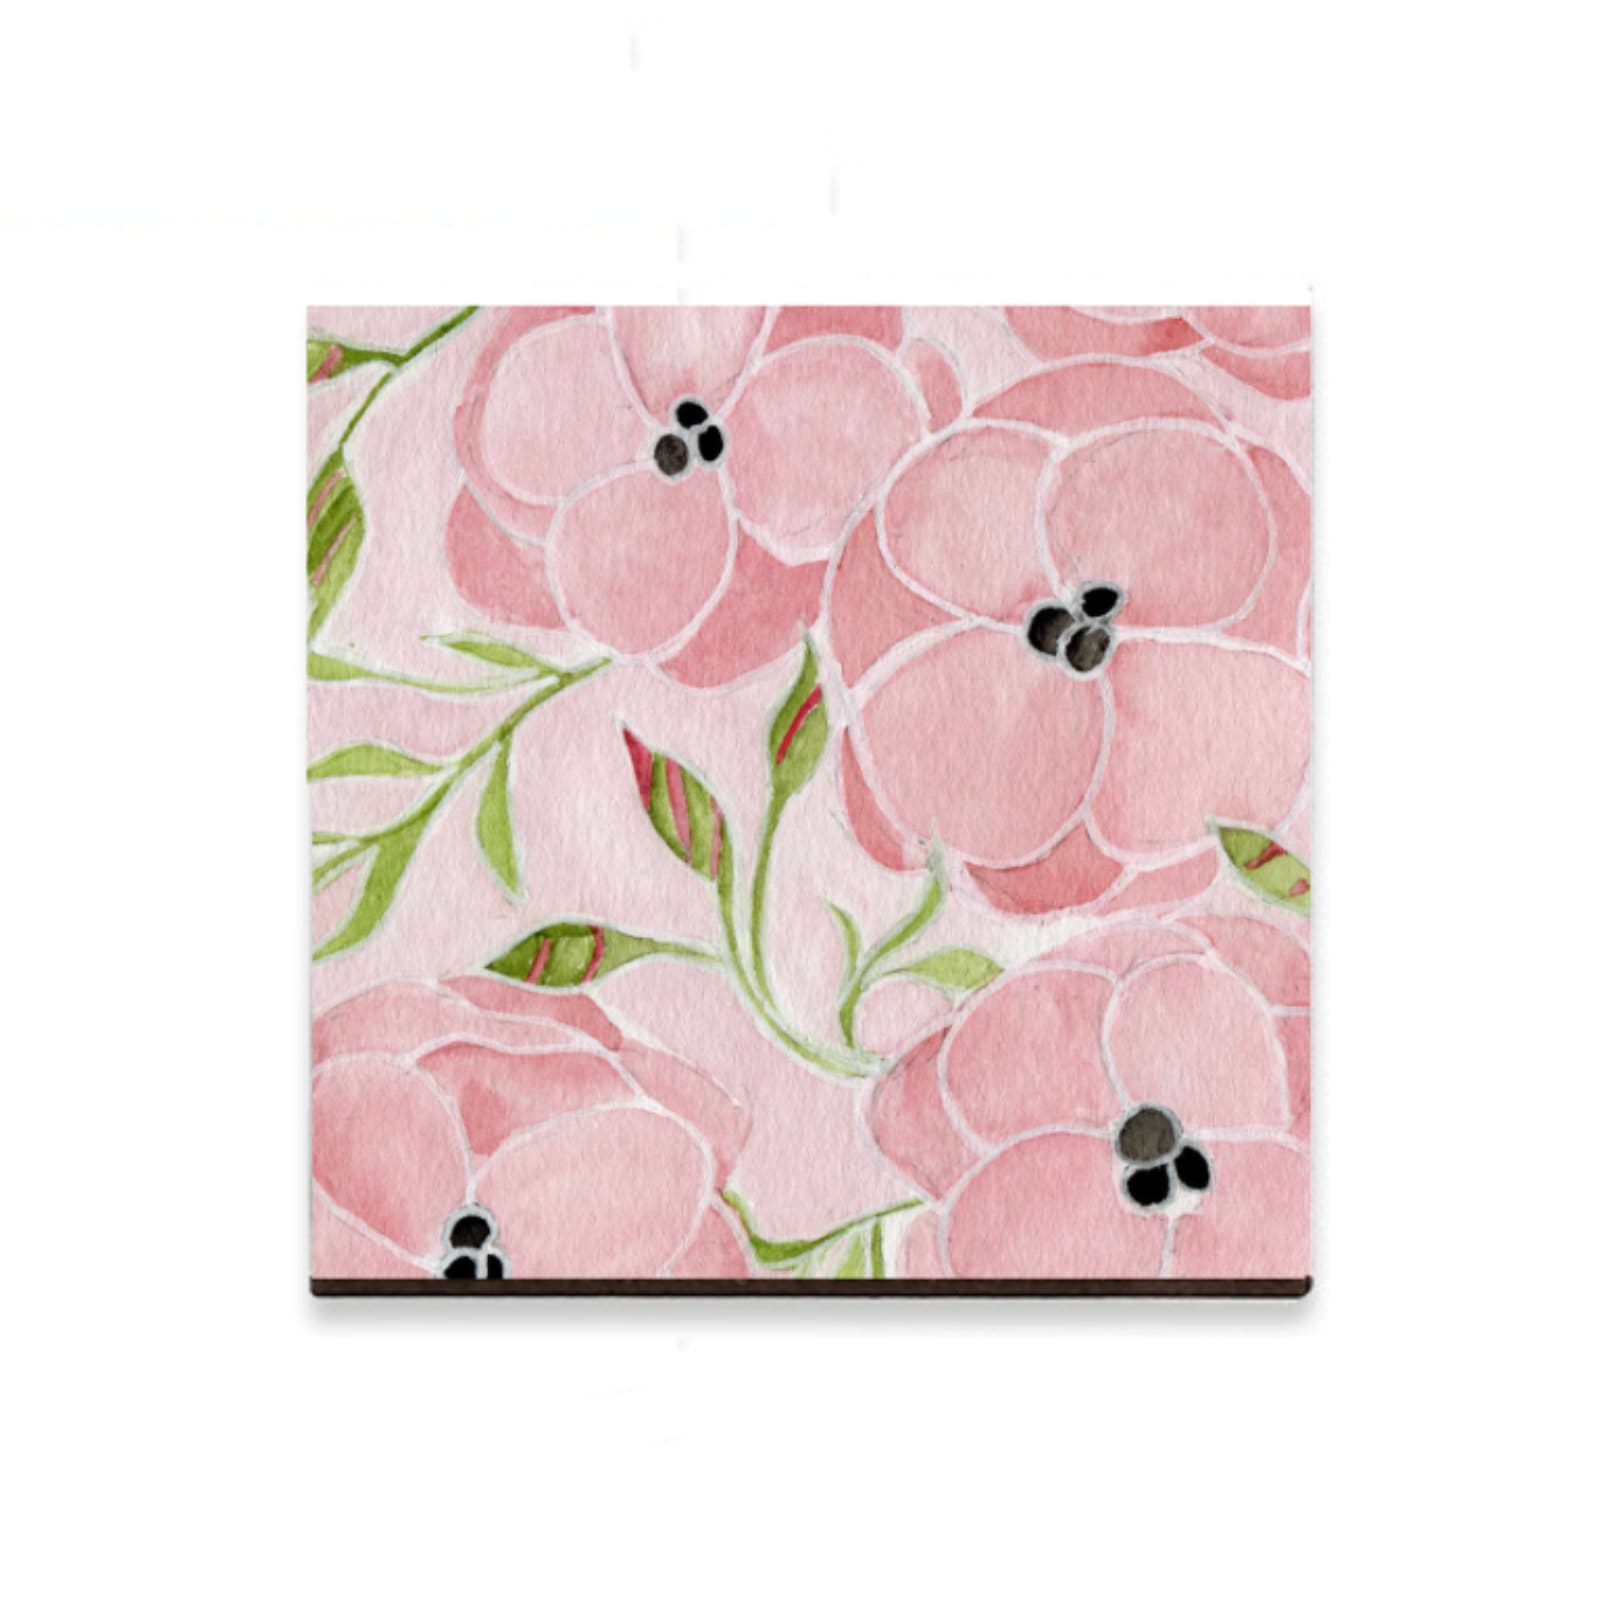 PinkPolish Design Magnets "Flowers and Buds" Wood Refrigerator Magnet